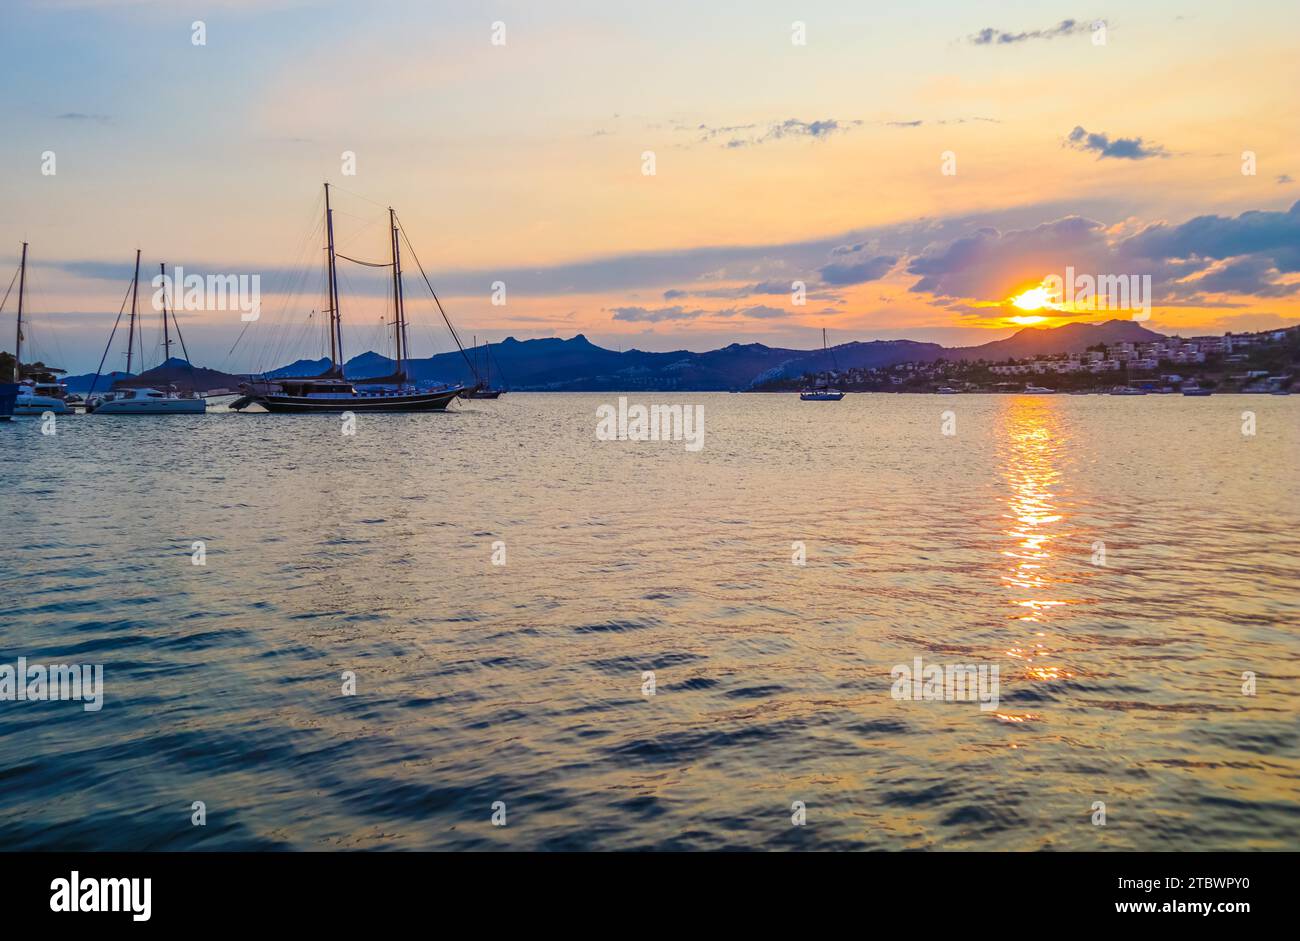 Beautiful Mediterranean coast with islands, mountains and yachts at sunset Stock Photo